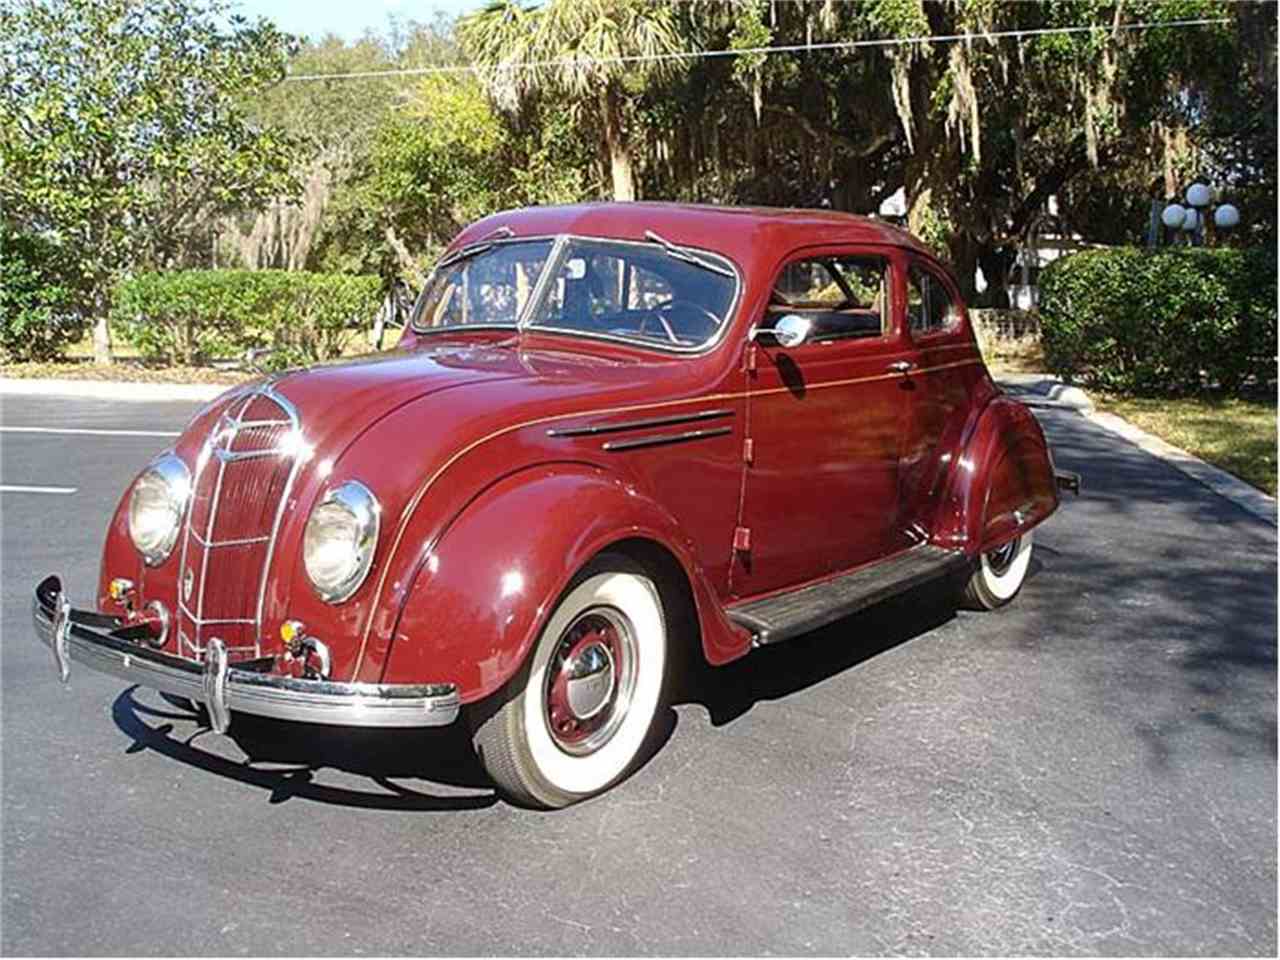 Where can you find online listings for Desoto automobiles?